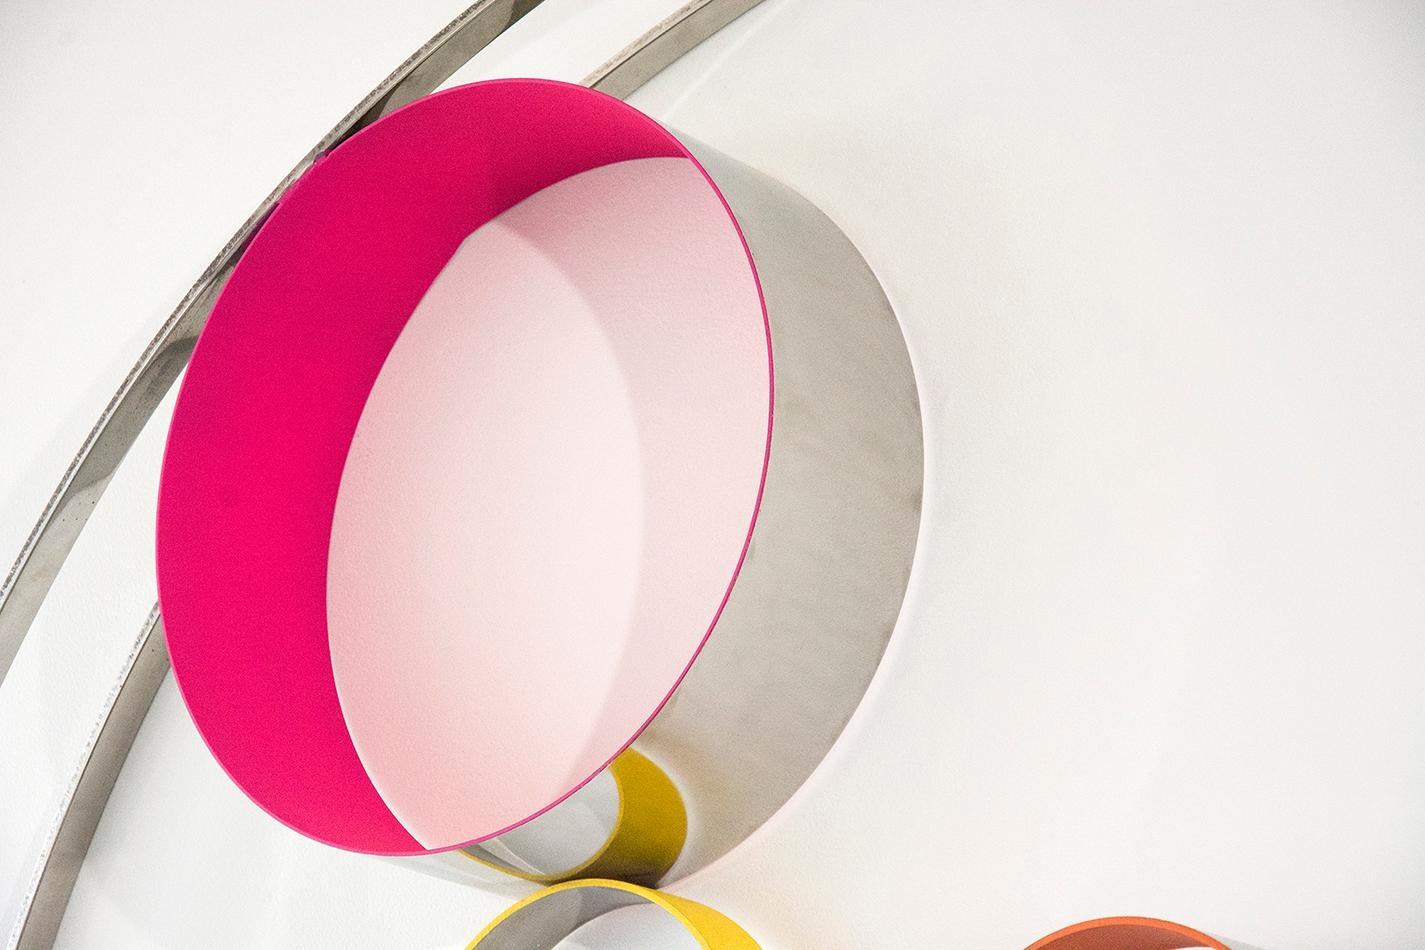 A playful collection of steel rings and disks bubble and swirl within the confines of two steel hoops. The elements of this modernist inspired wall tondo by Philippe Pallafray are polished to a high sheen and patinated in hot pink, lemon and orange.